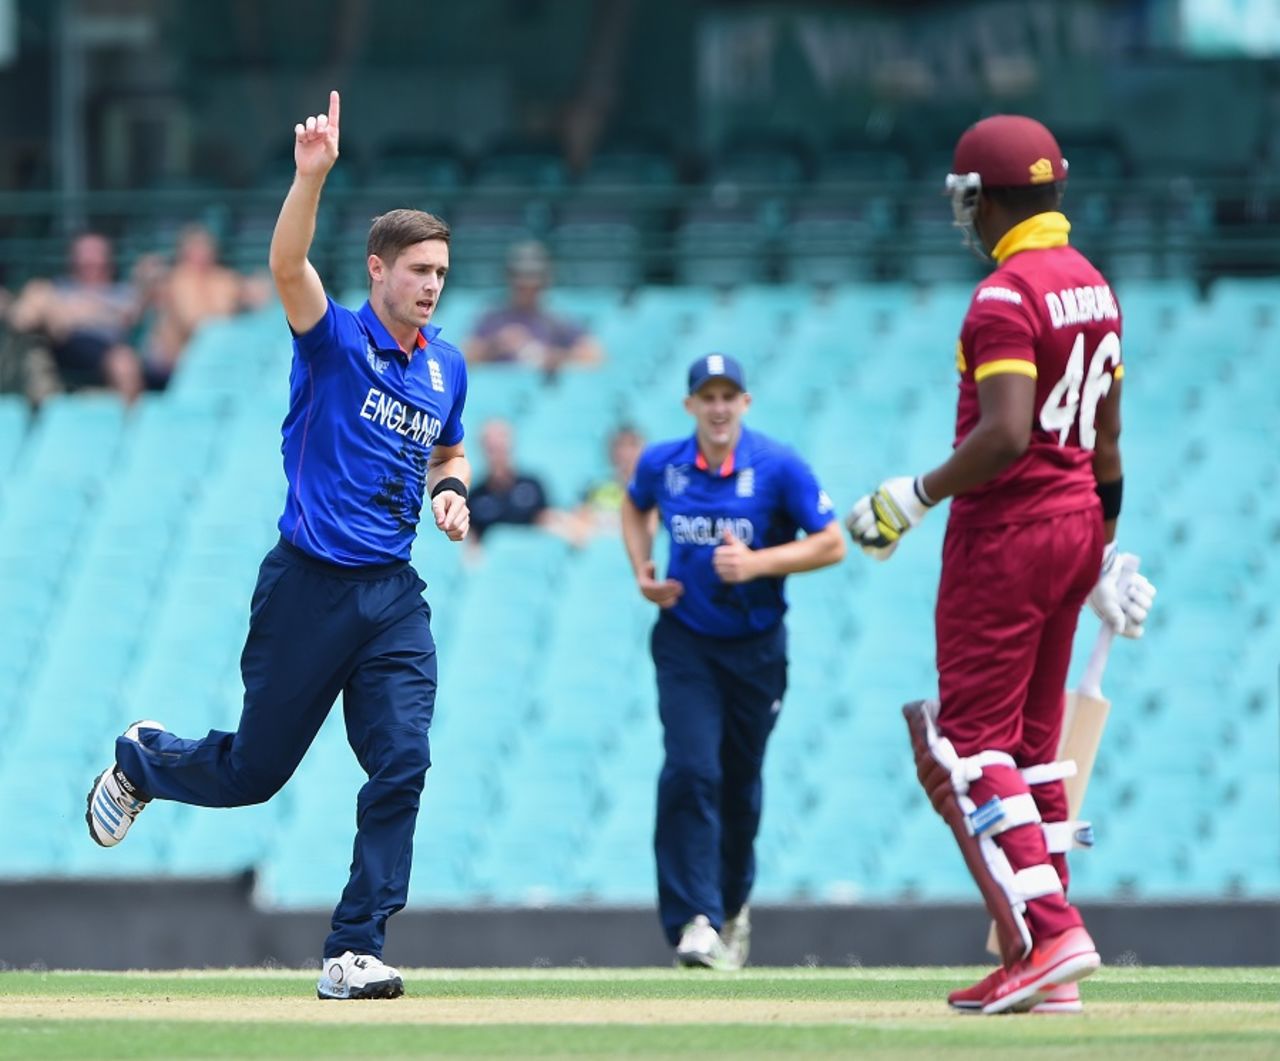 Chris Woakes sent back Darren Bravo for a first-ball duck, England v West Indies, World Cup warm-up match, Sydney, February 9, 2015